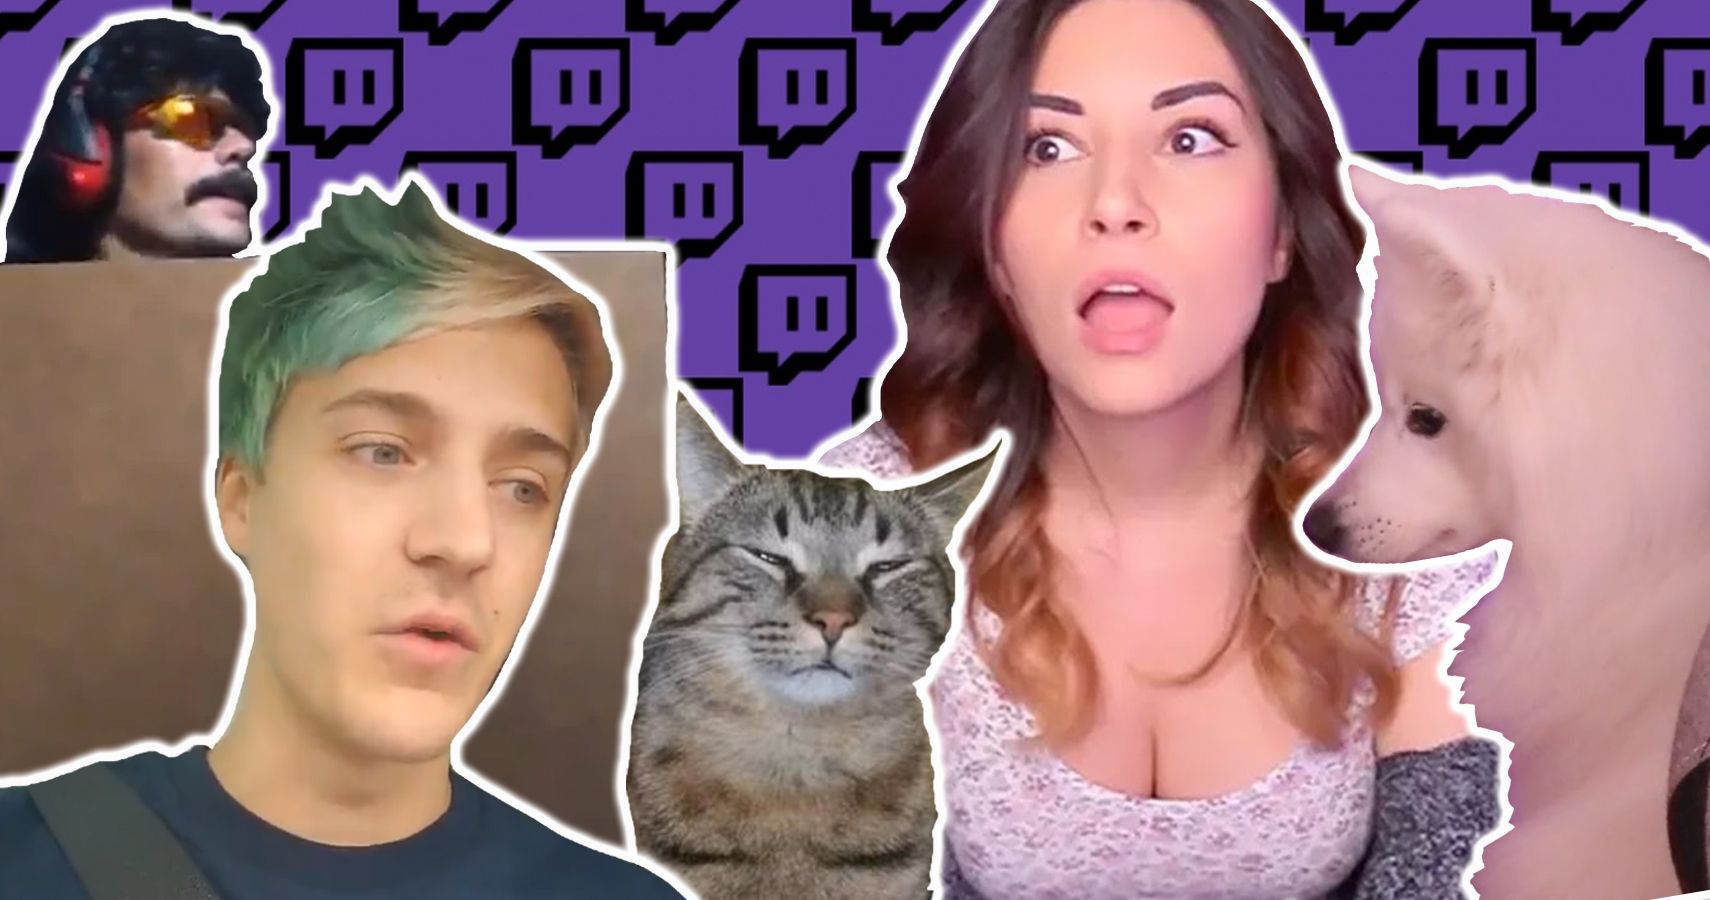 Top 5 Streamer Controversies Of 2019